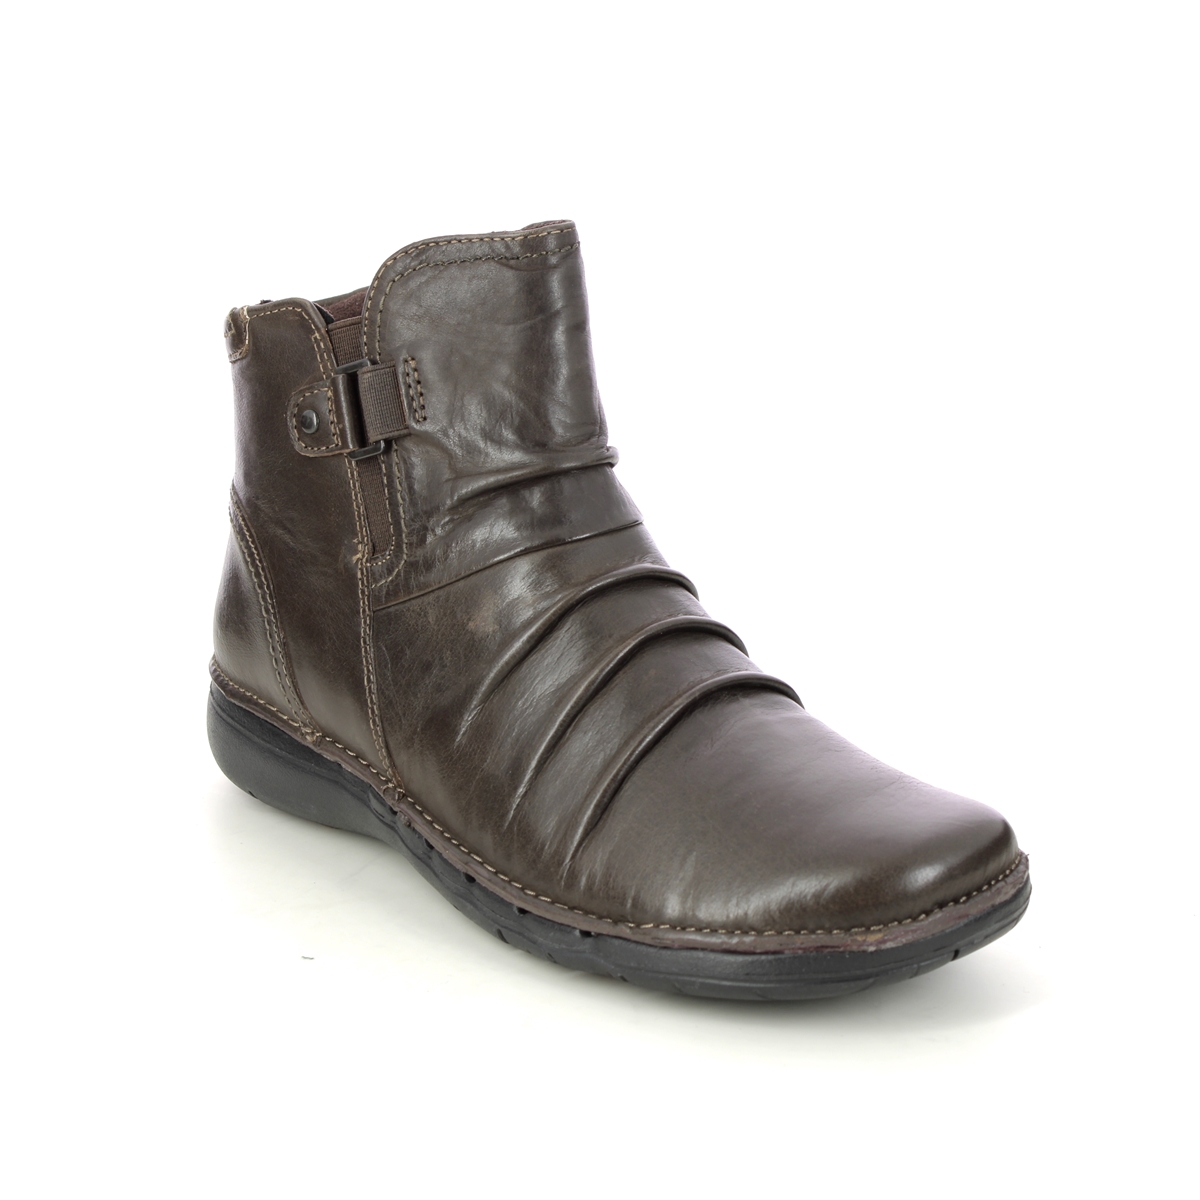 Clarks Un Loop Top Brown Leather Womens Ankle Boots 686624D In Size 4.5 In Plain Brown Leather